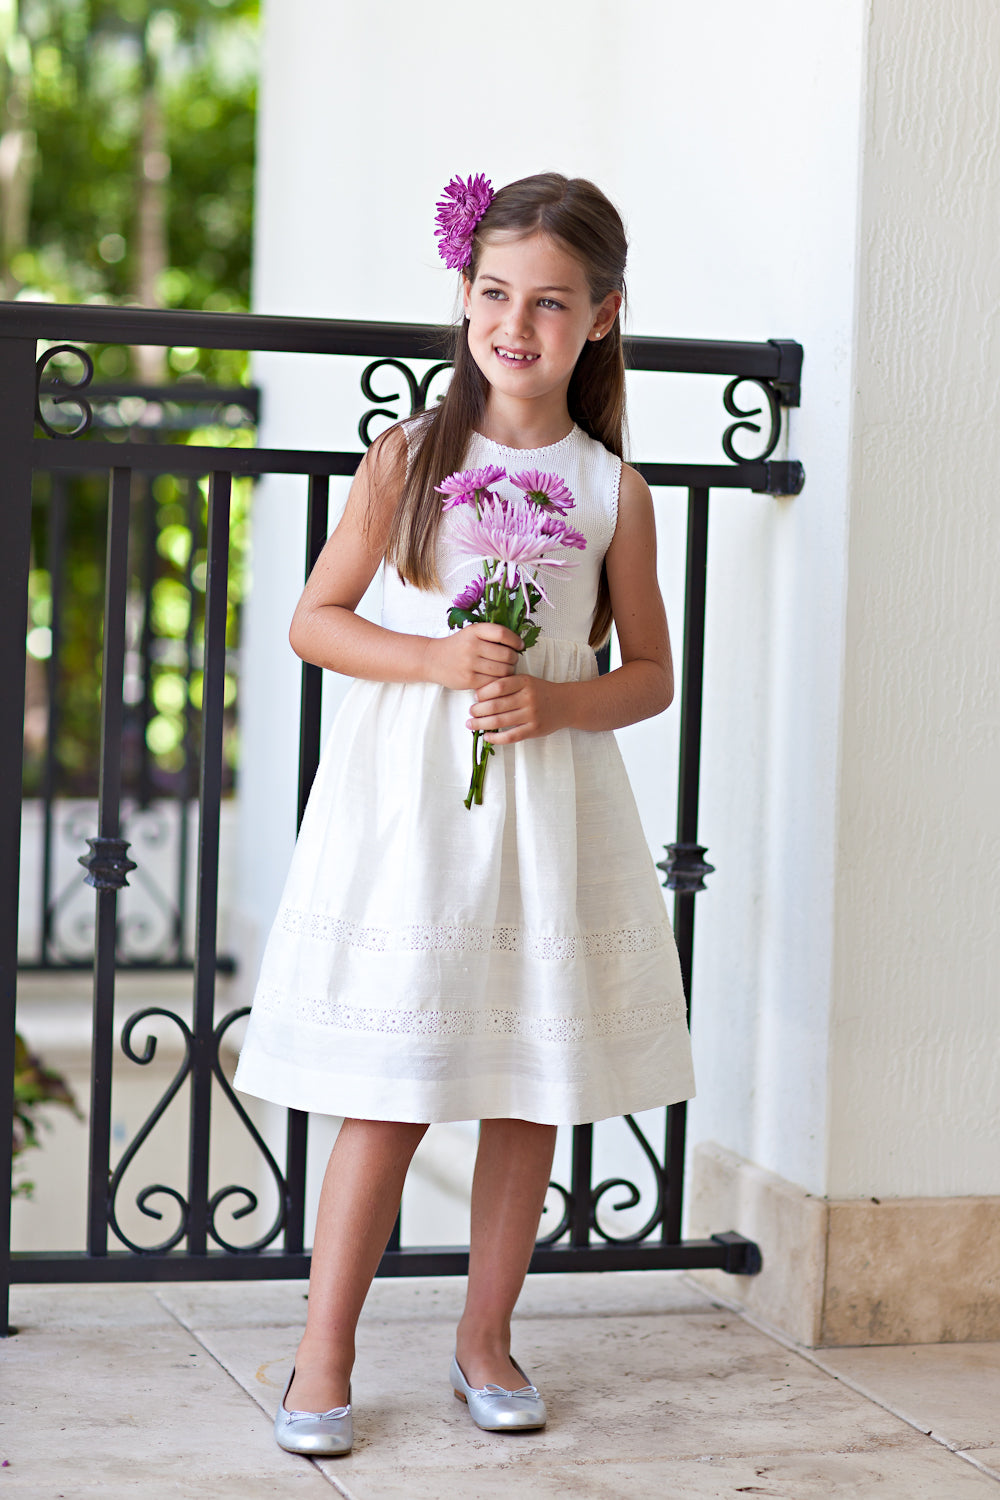 Here comes... the flower girl!